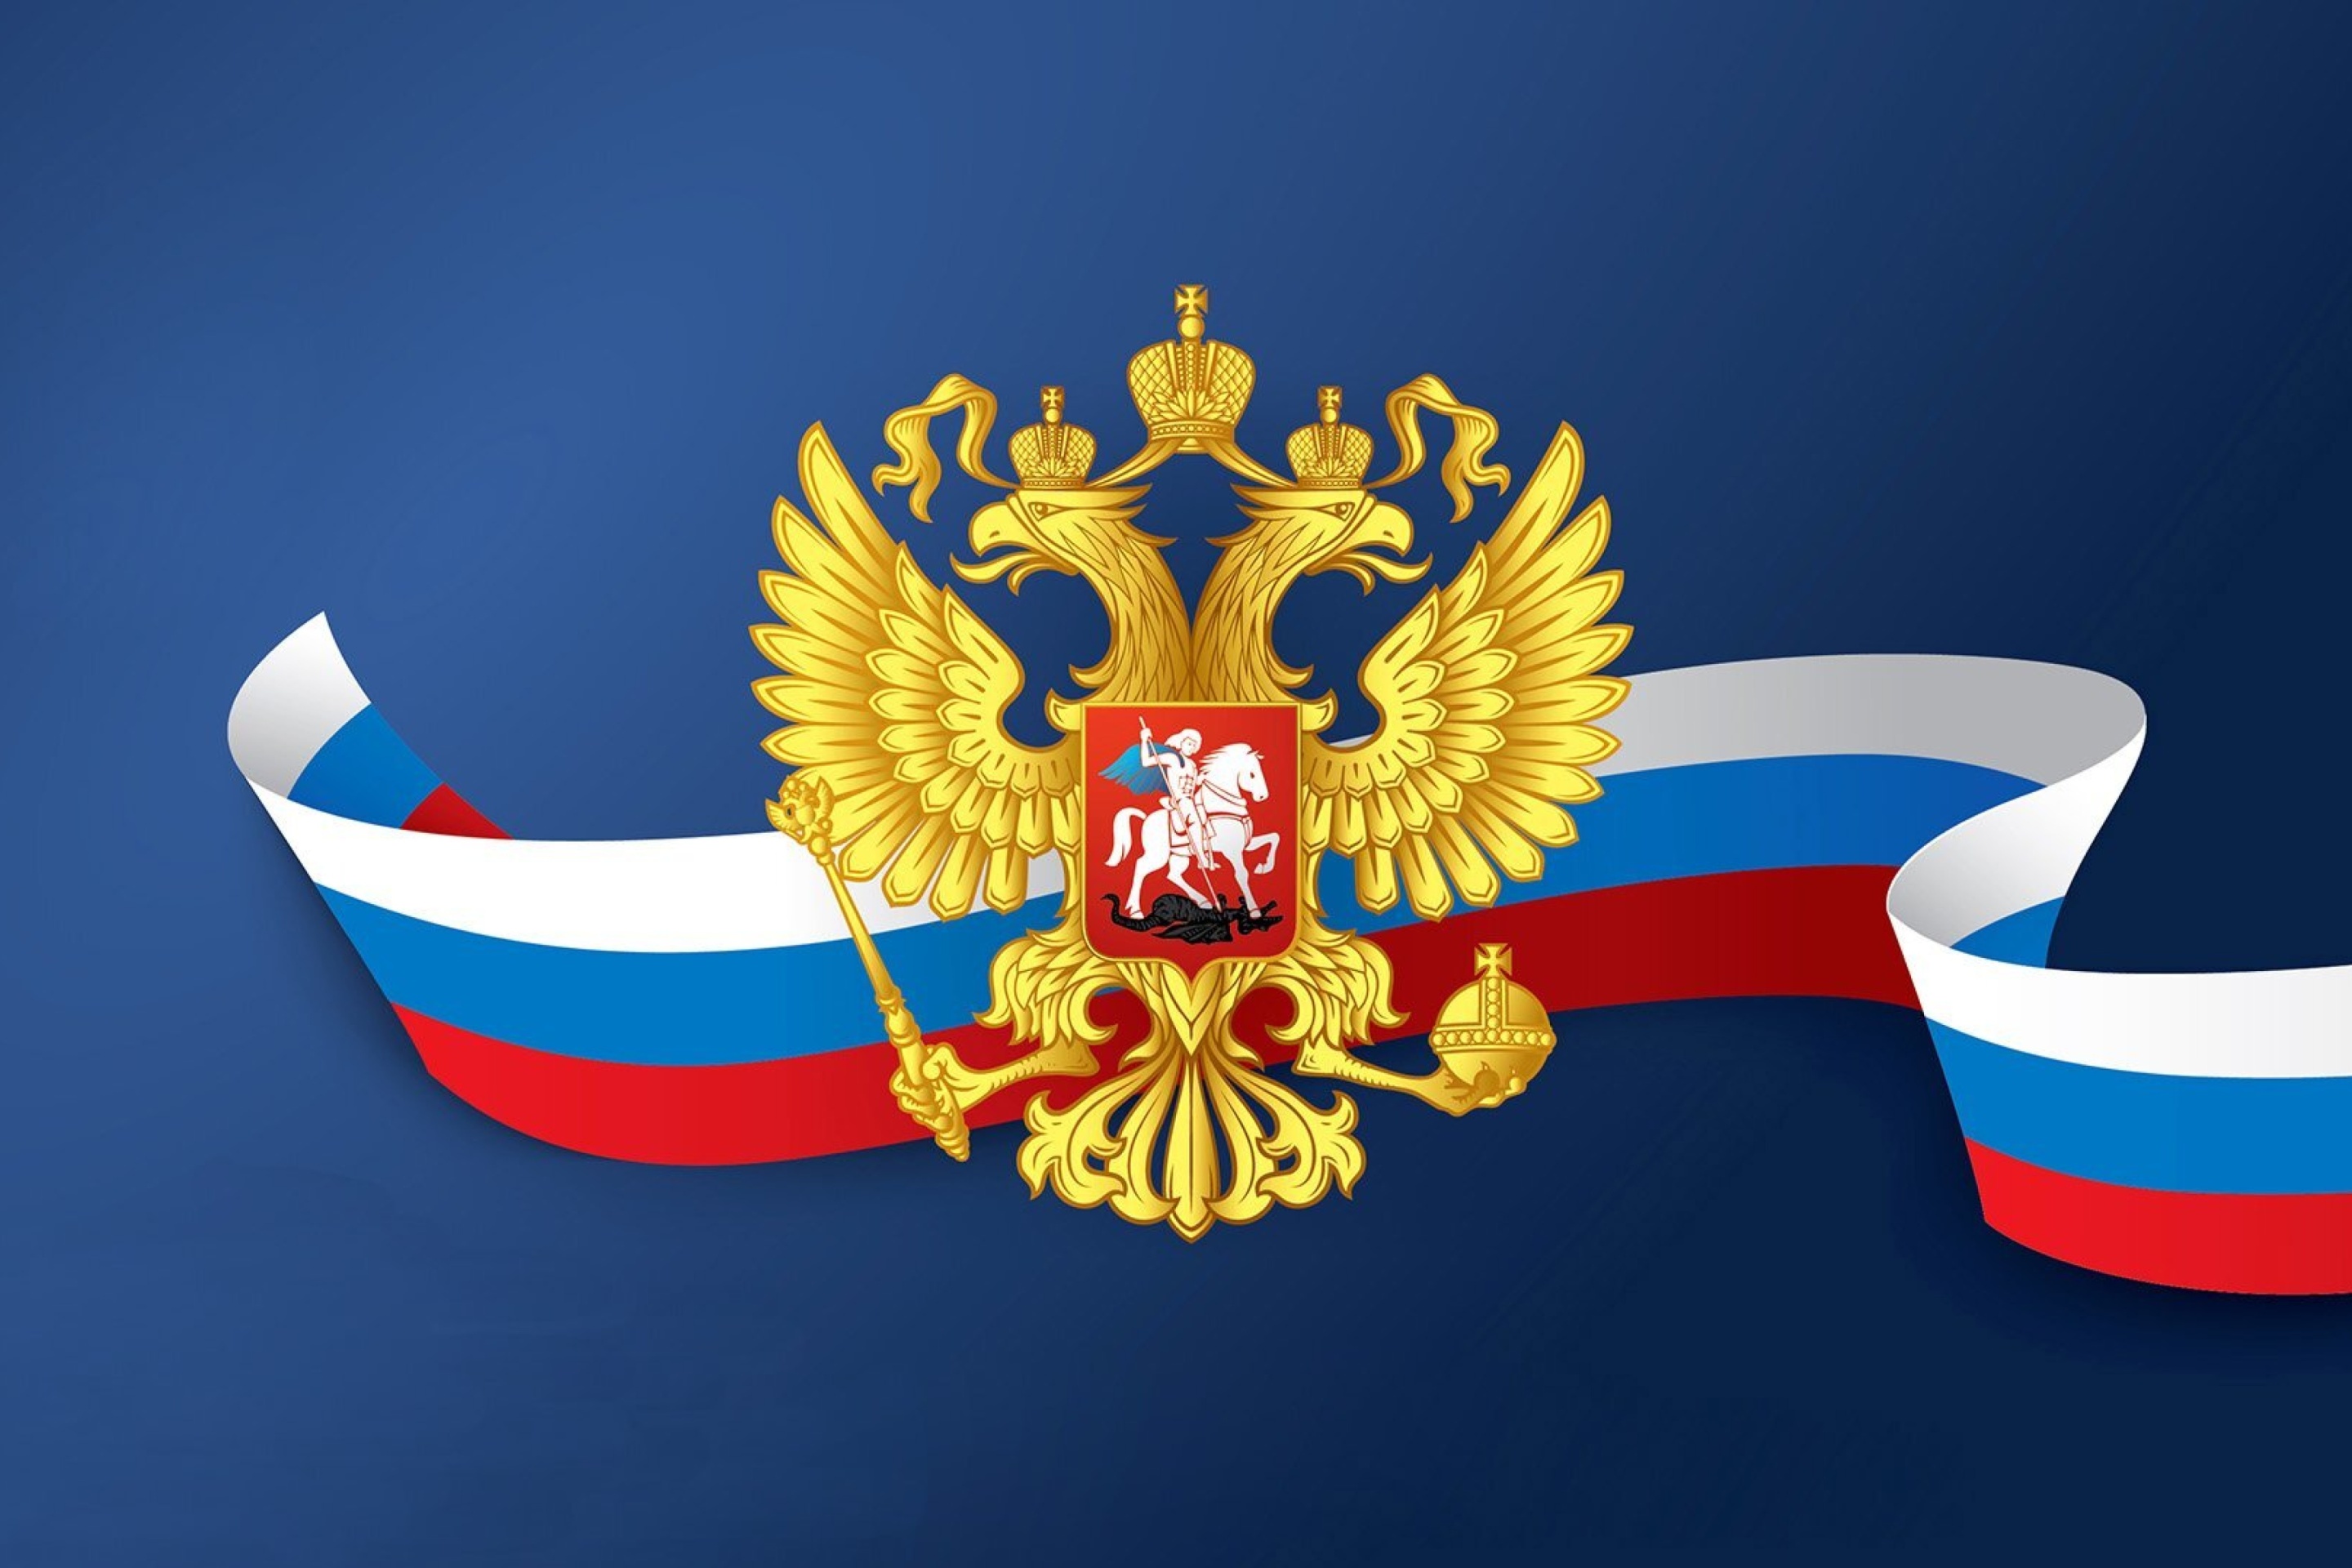 Russian coat of arms and flag wallpaper 2880x1920